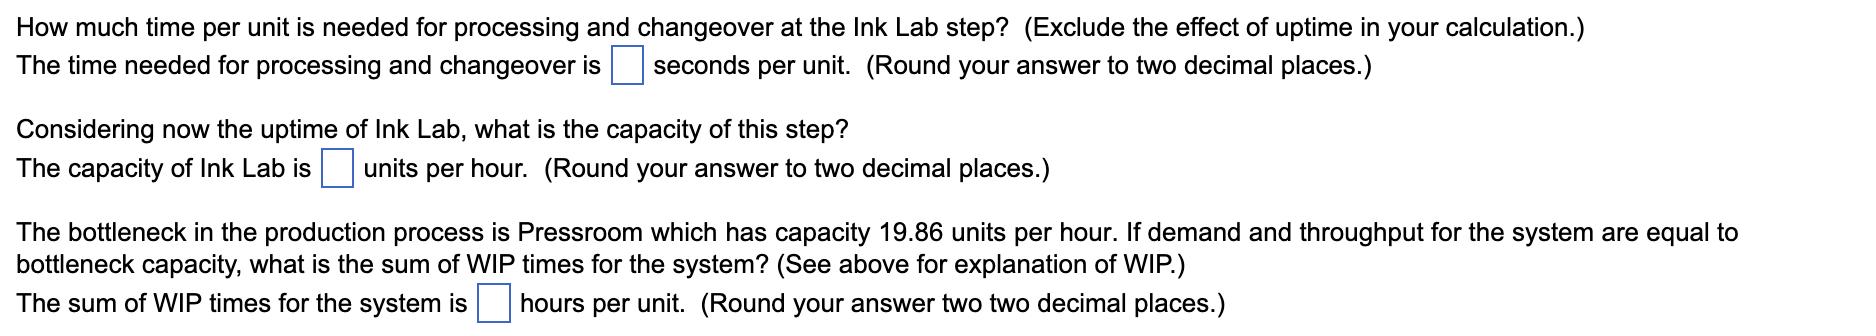 How much time per unit is needed for processing and changeover at the Ink Lab step? (Exclude the effect of